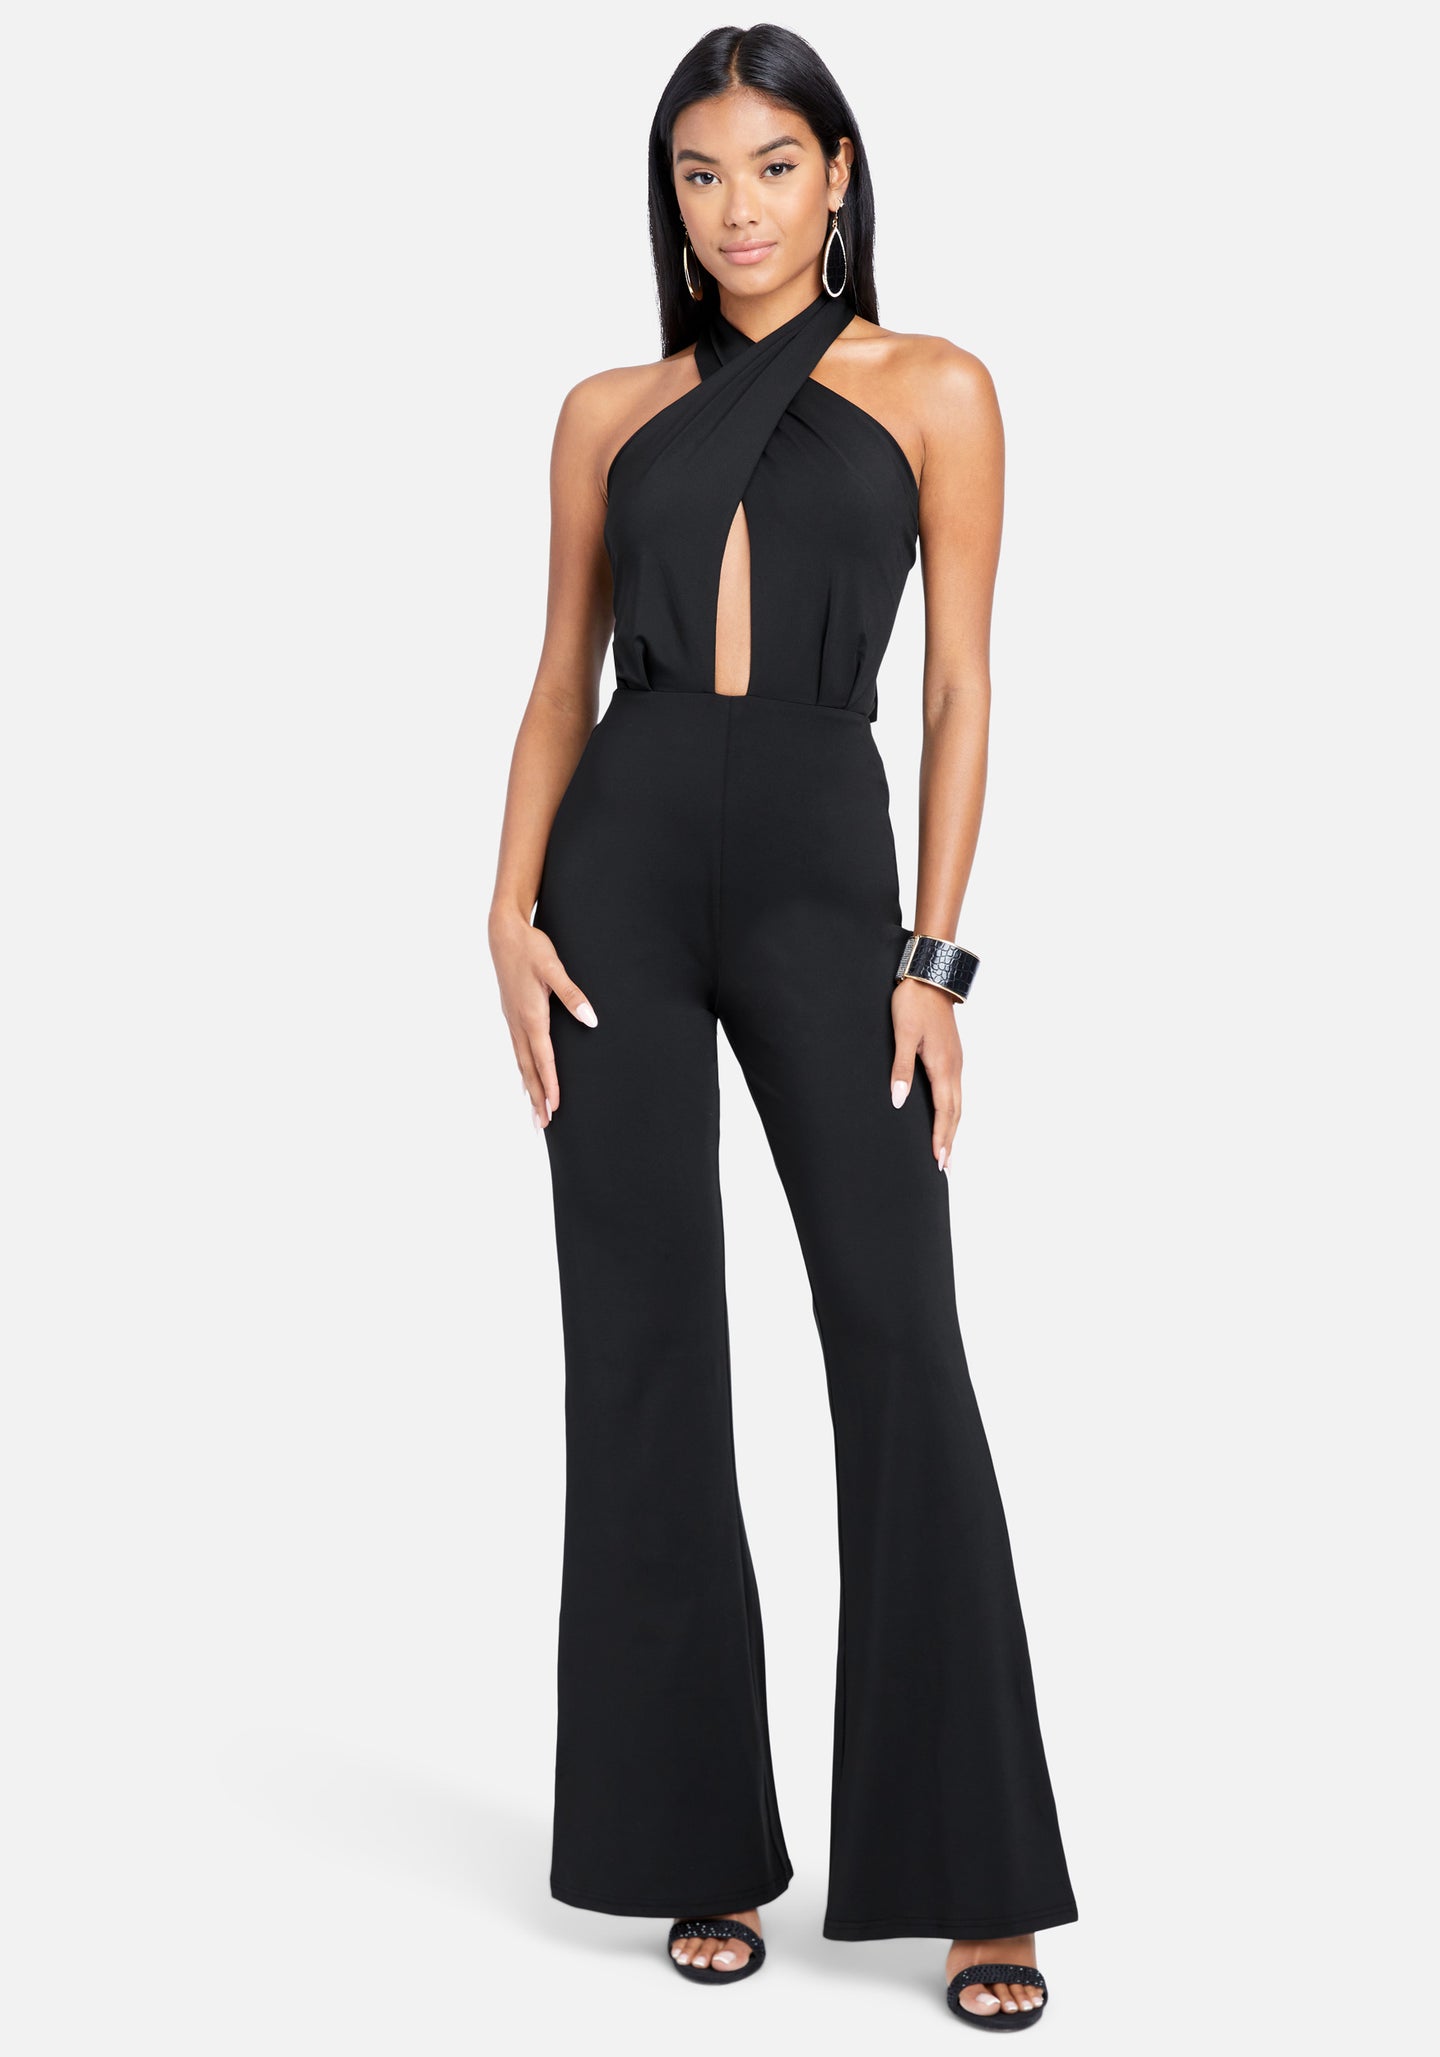 Bebe: The Best of Fall – Buy 3 Styles, Get 30% Off